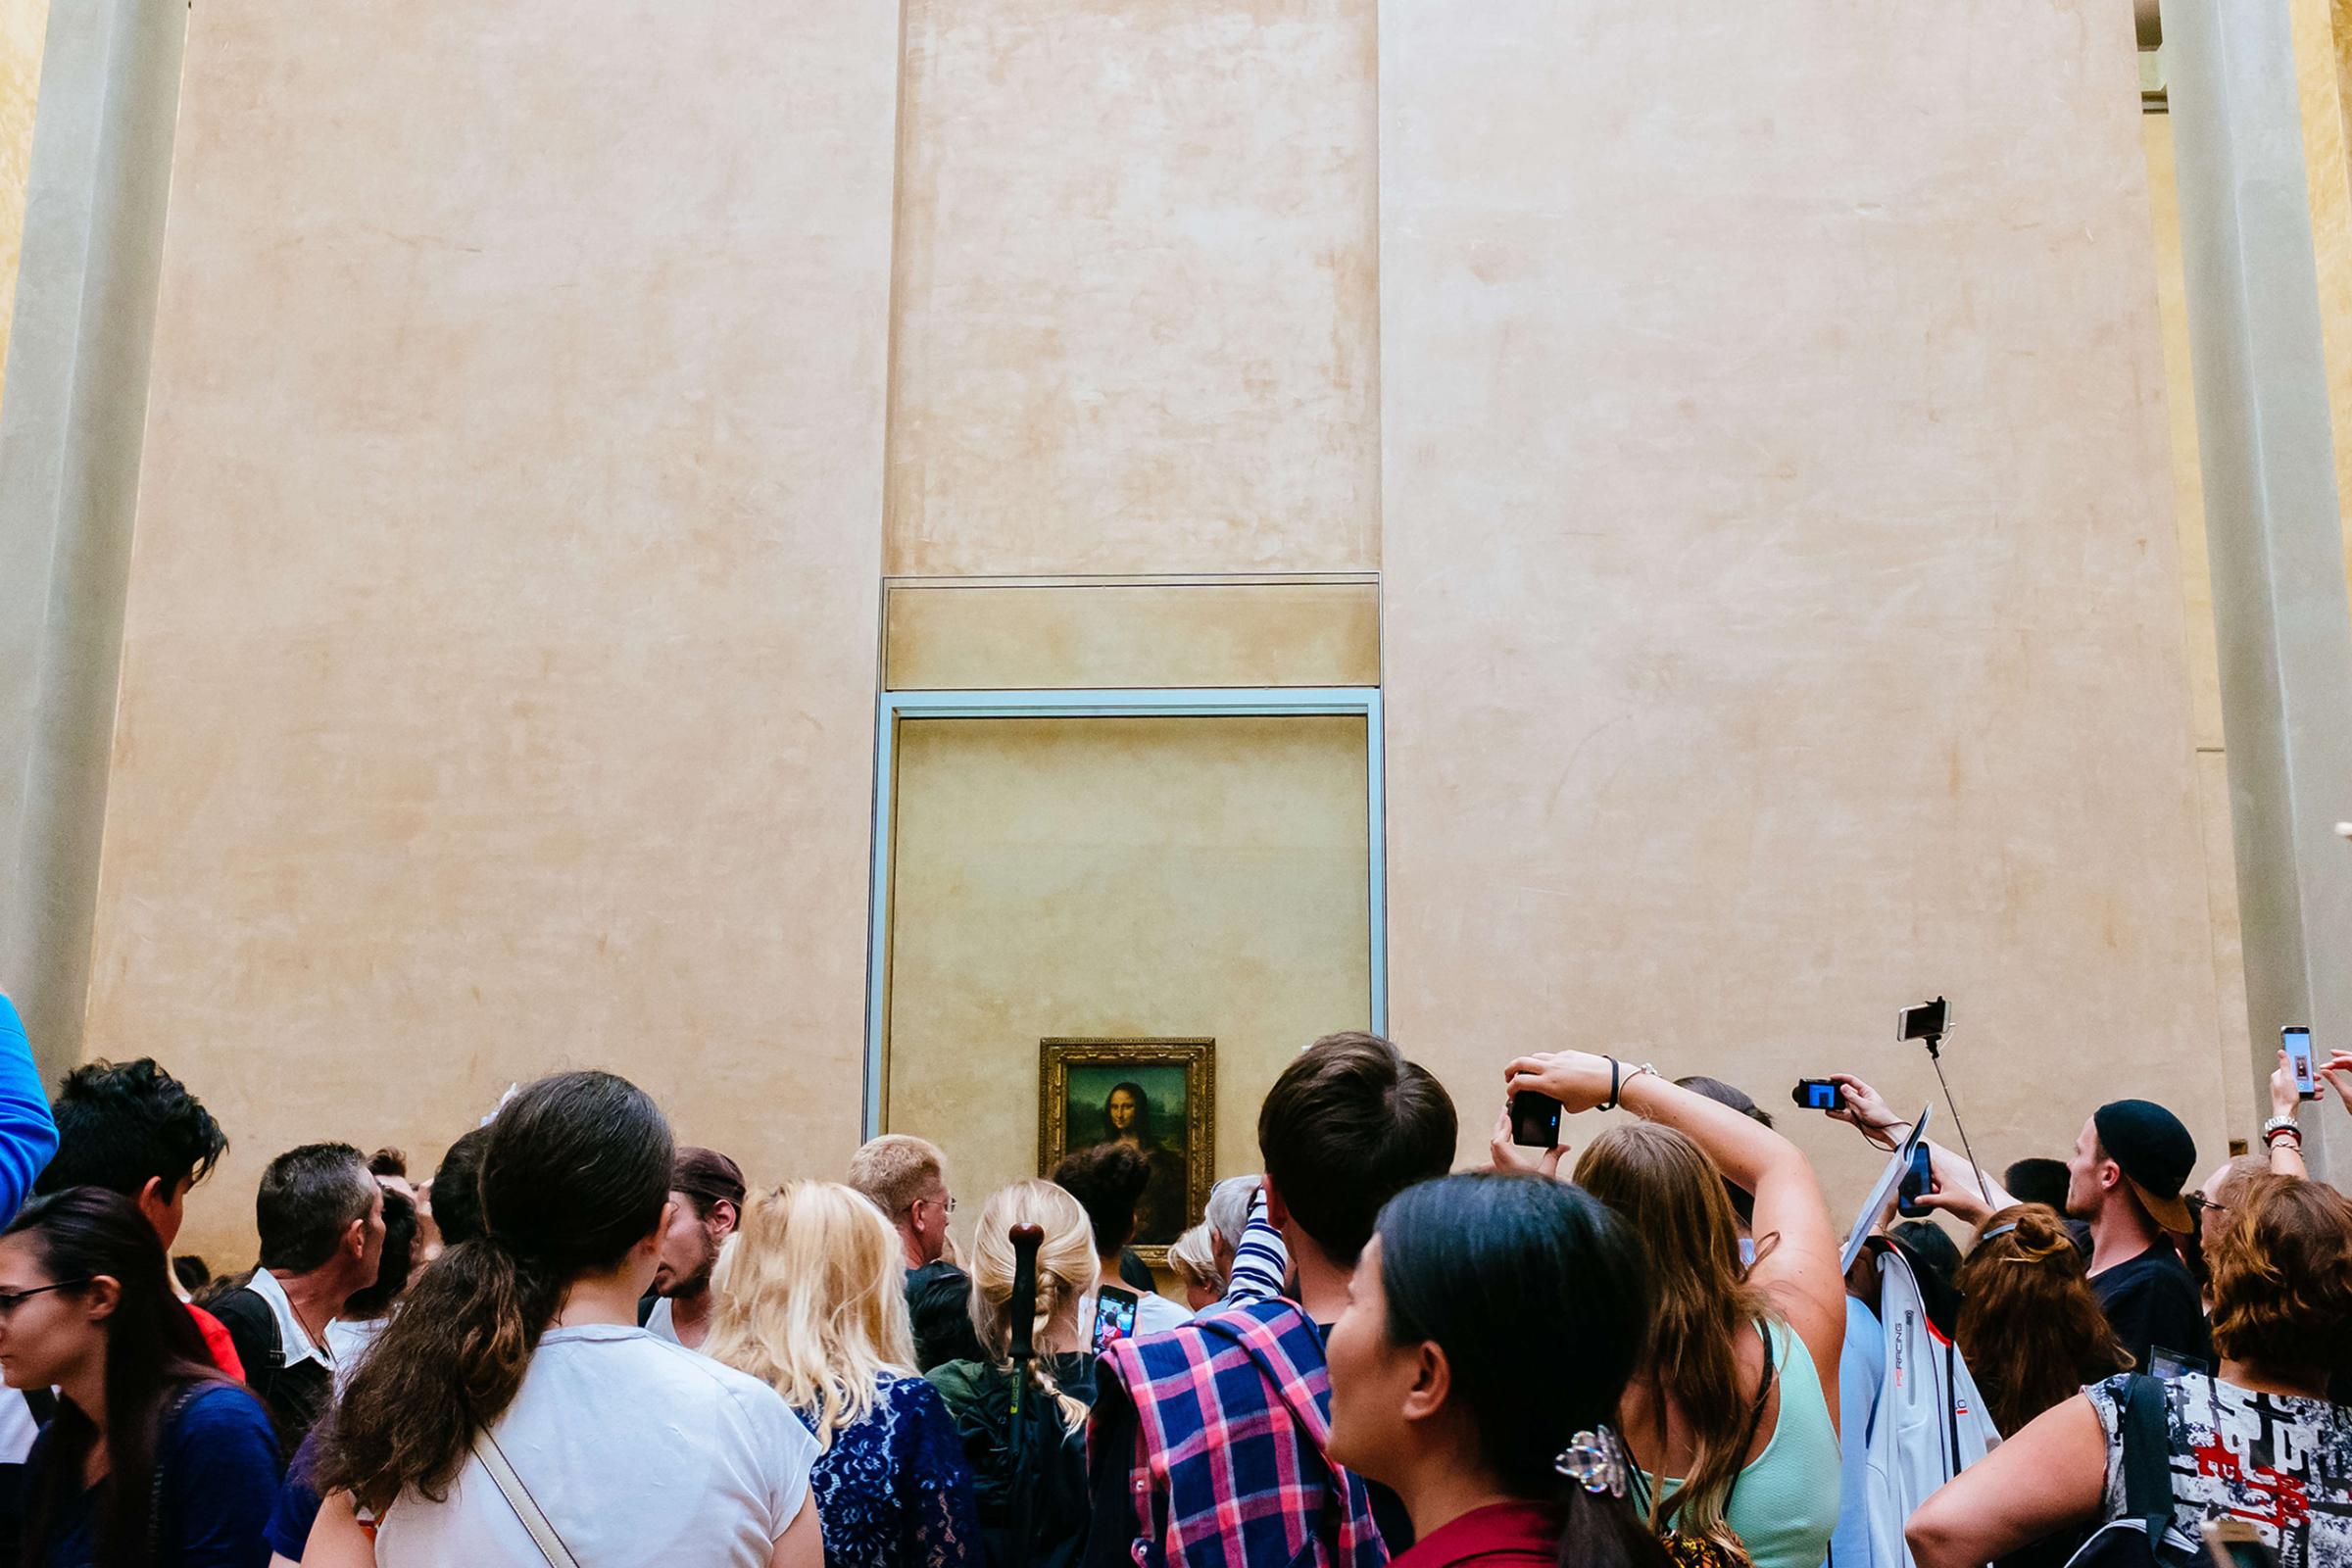 Mona Lisa painting surrounded by hundreds of visitors in the